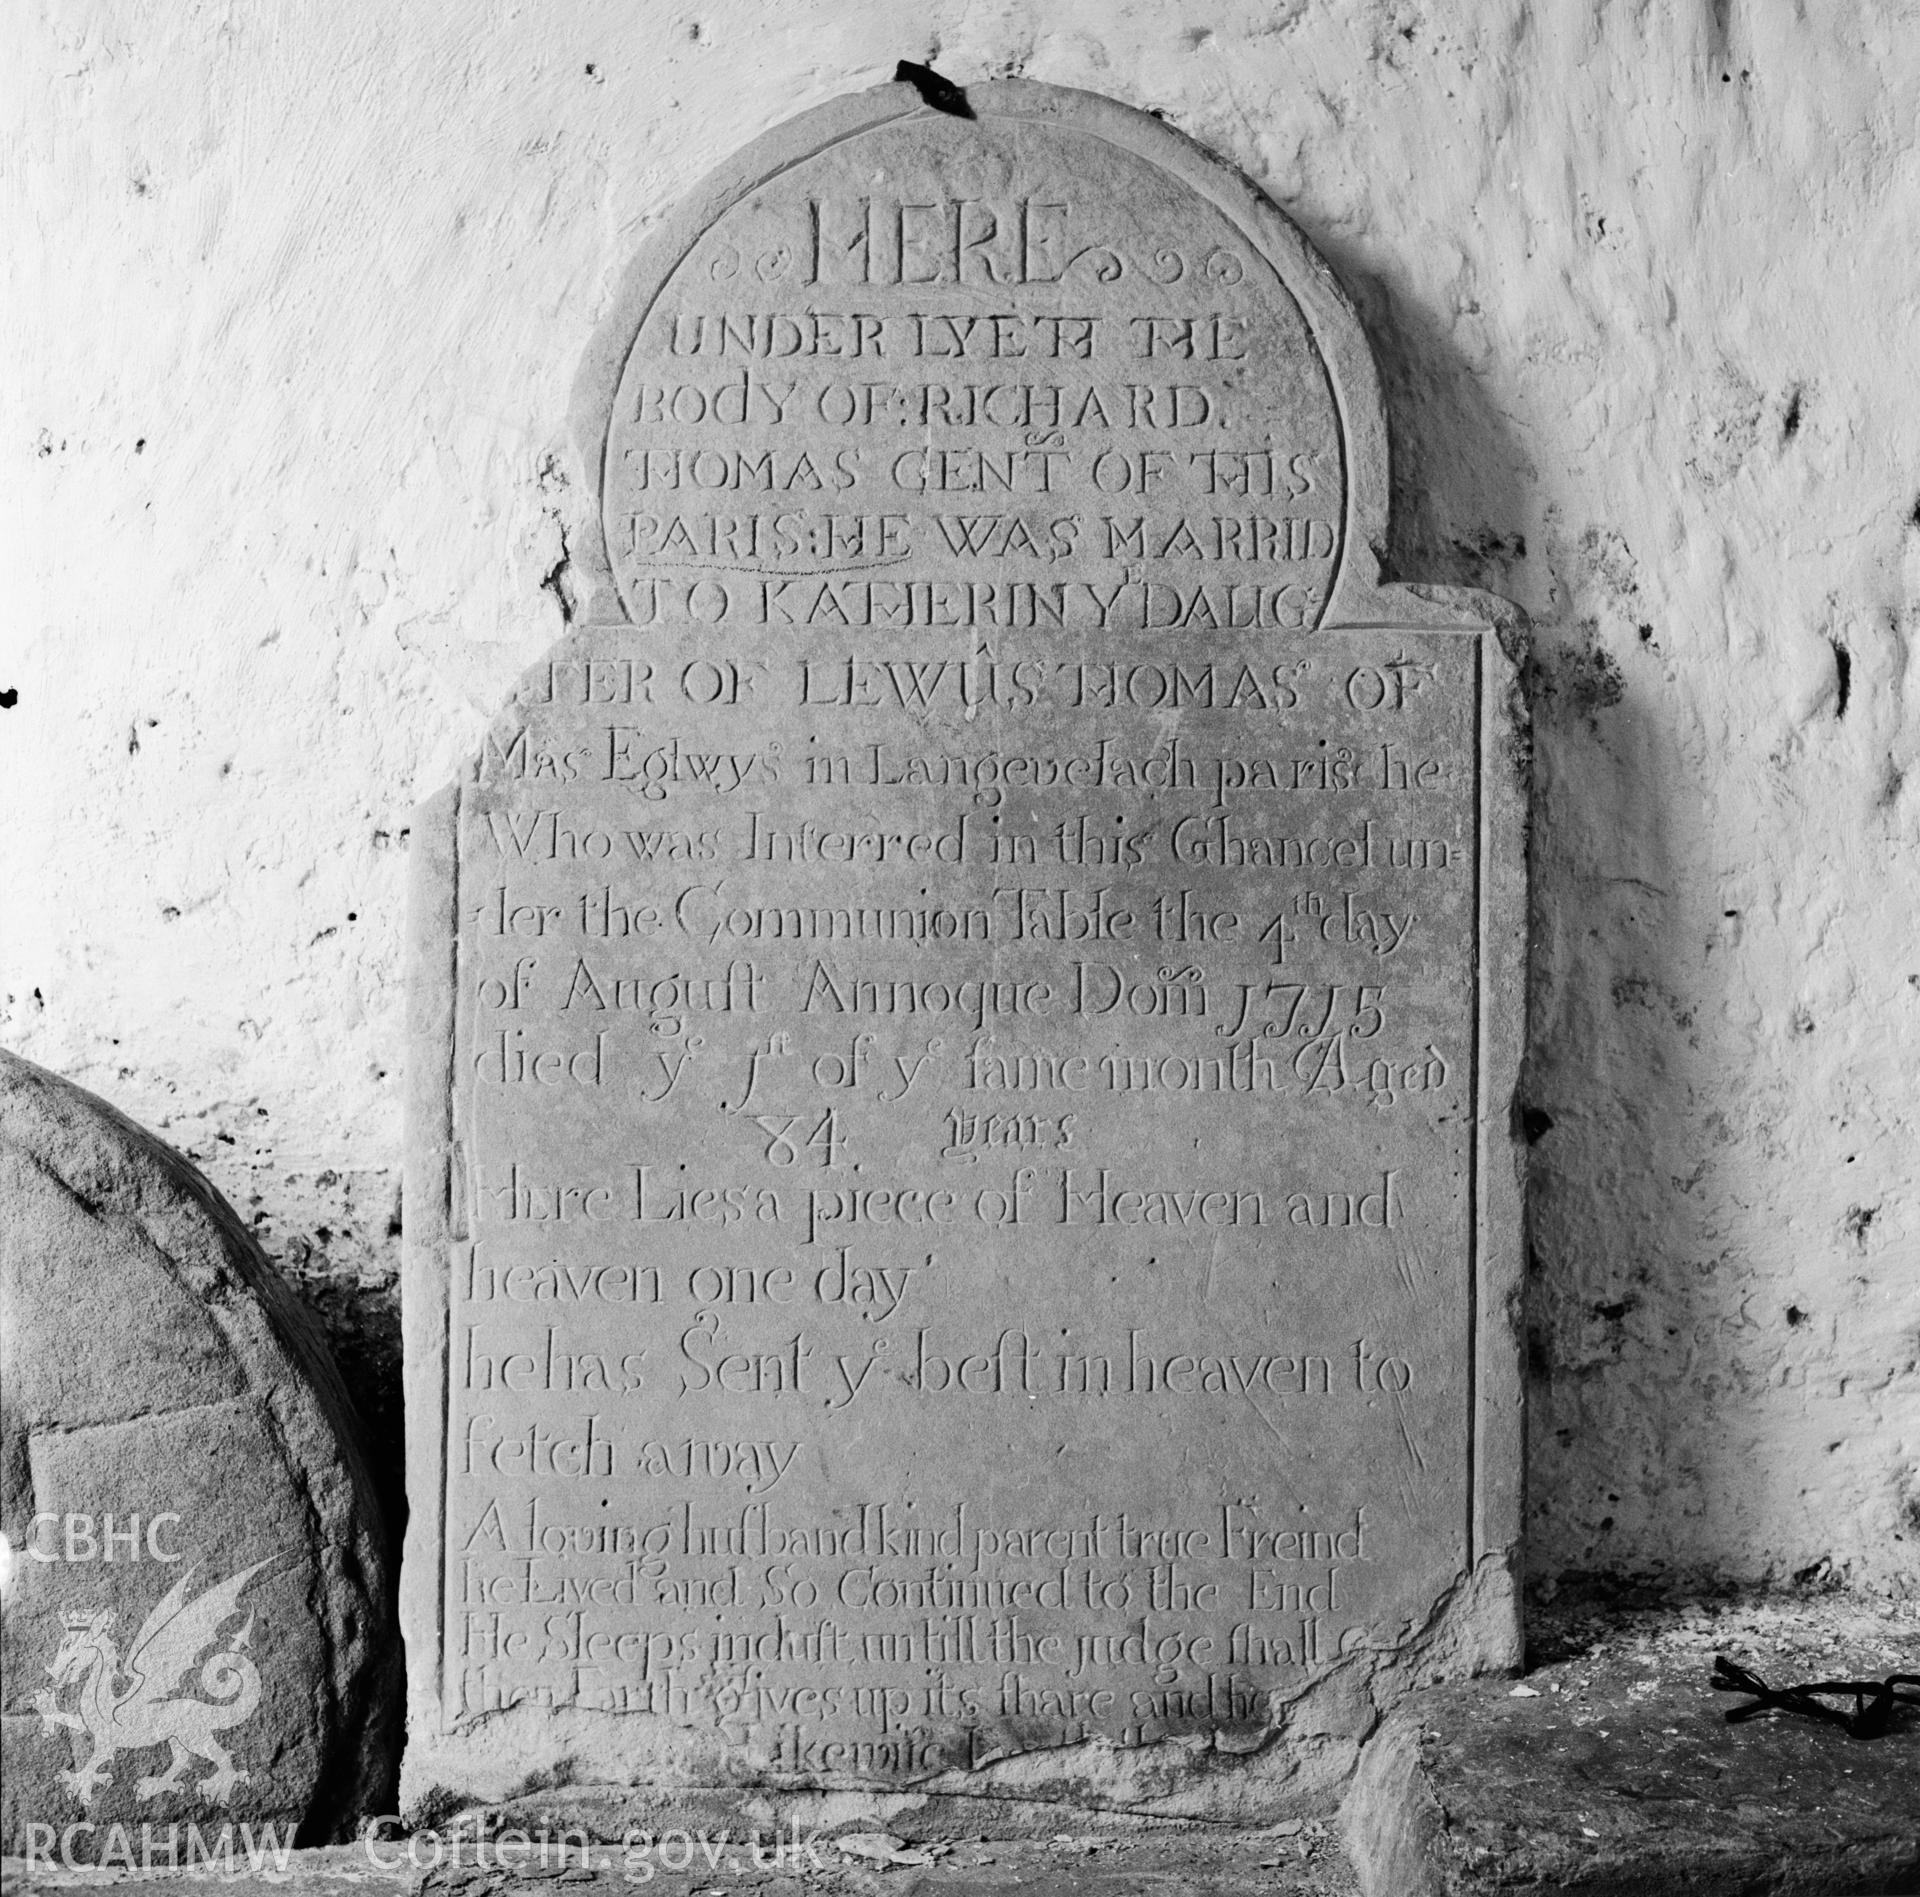 Memorial stone in the porch of St Ciwg's Church, taken by RCAHMW, circa 1974.